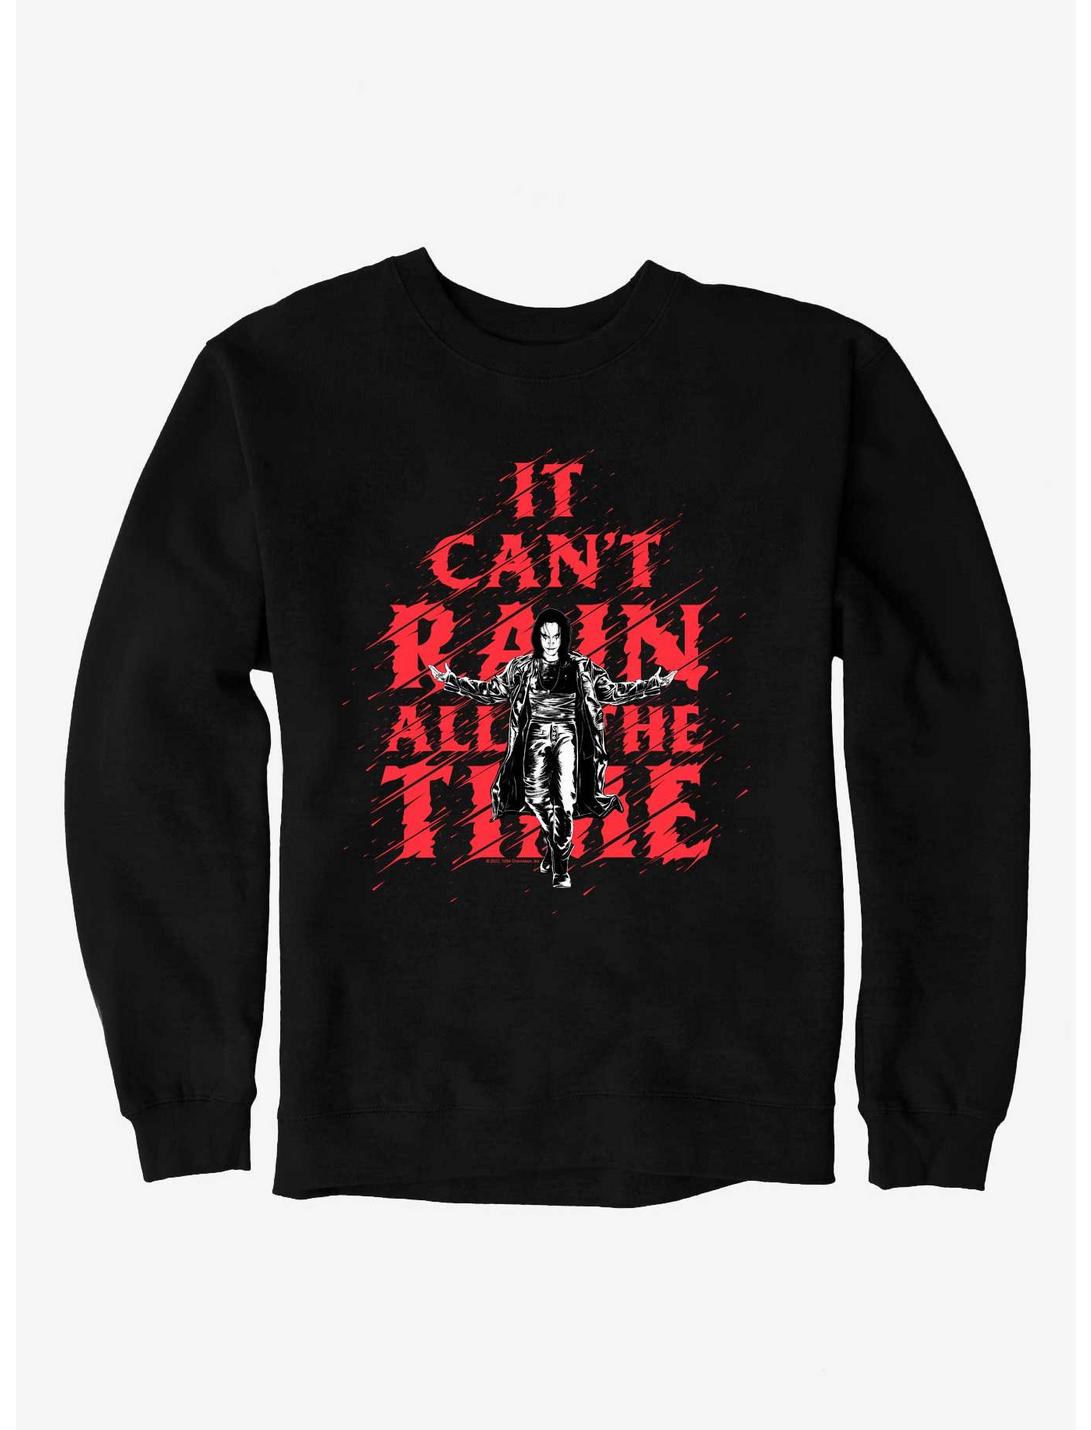 The Crow It Can't Rain All The Time Sweatshirt, BLACK, hi-res